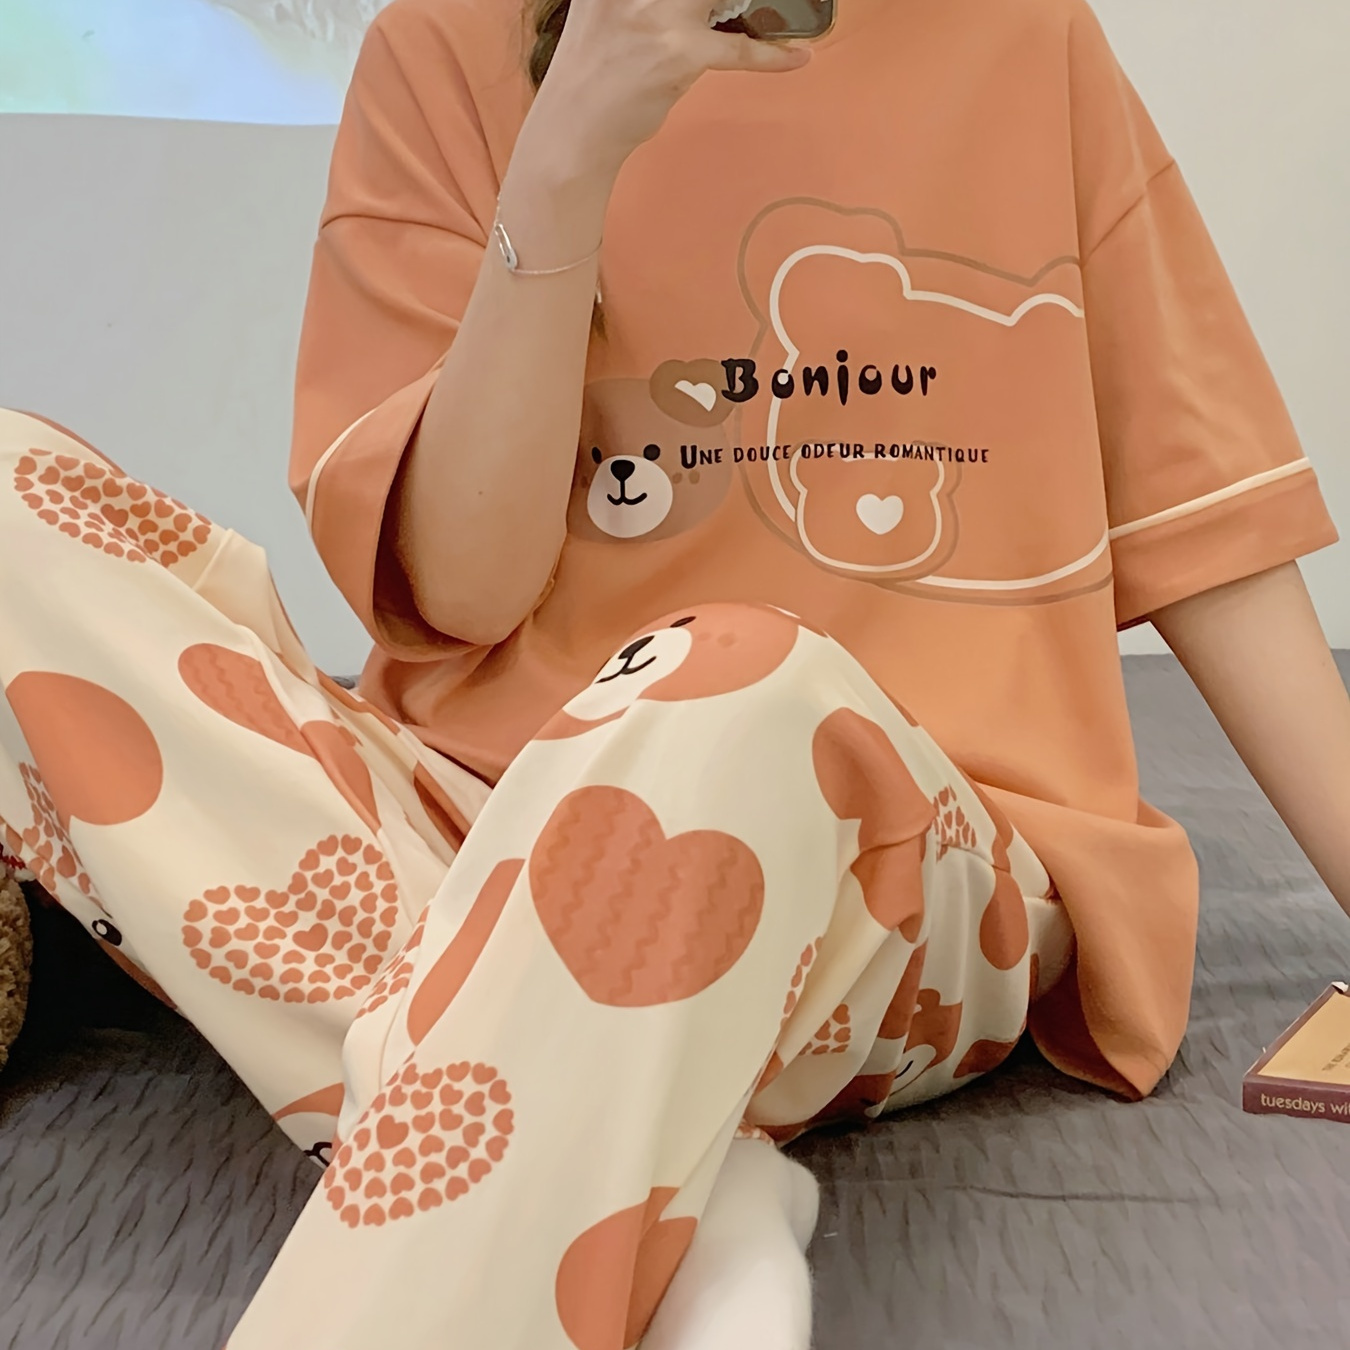 

Women's Cartoon Bear & Heart Print Casual Loose Fit Pajama Set, Short Sleeve Round Neck Top & Pants, Comfortable Relaxed Fit